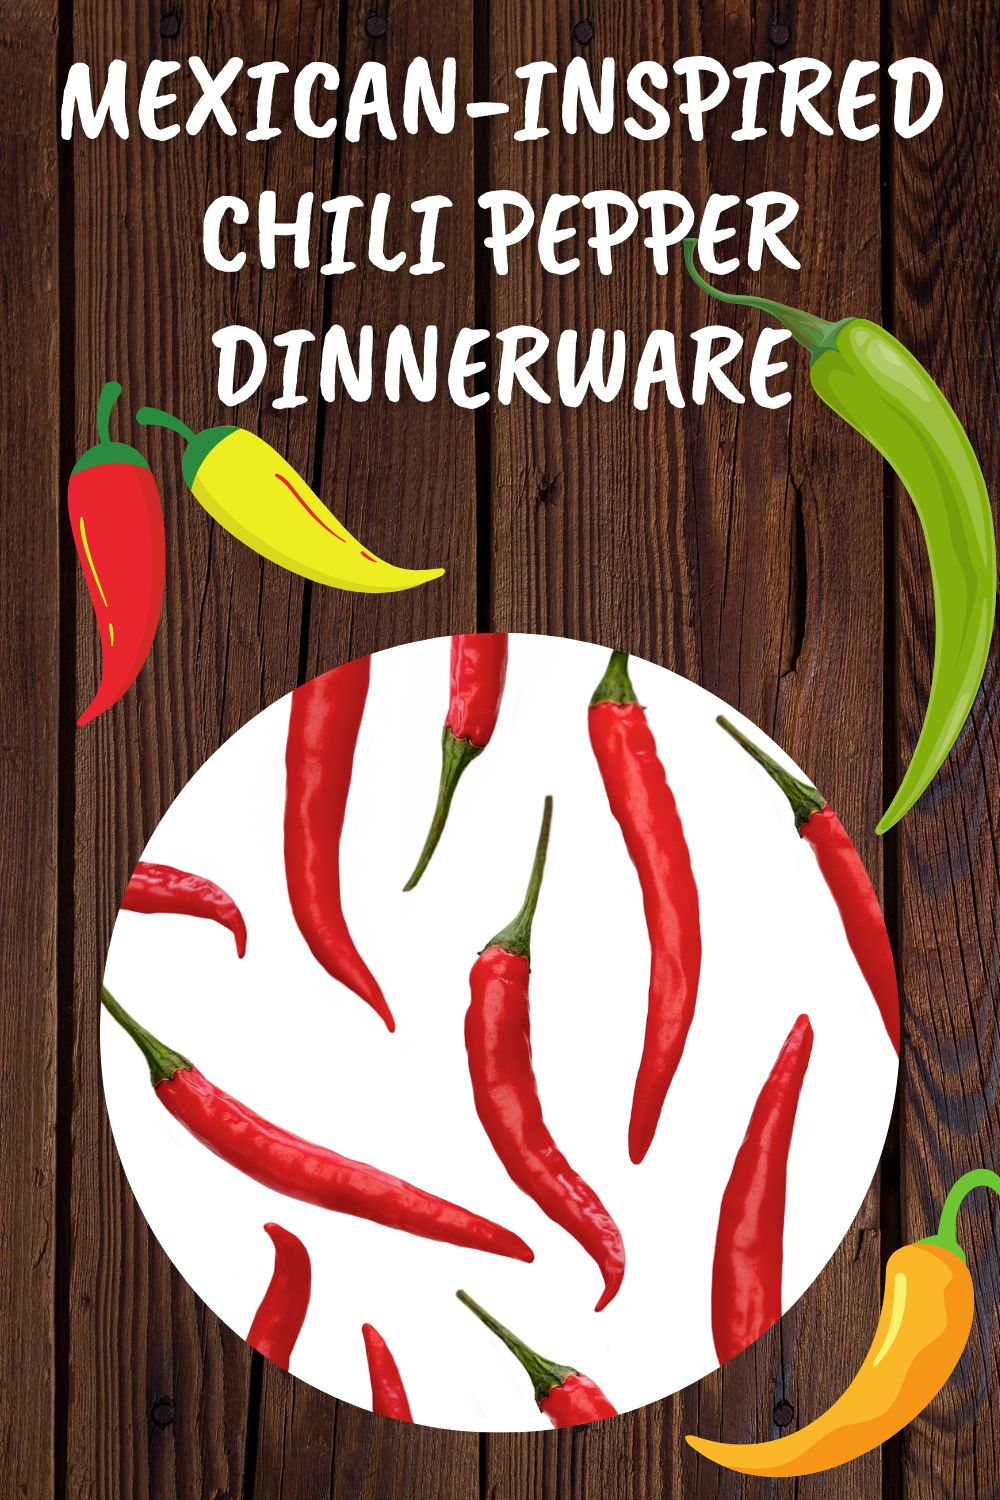 Mexican inspired chili pepper dinnerware.